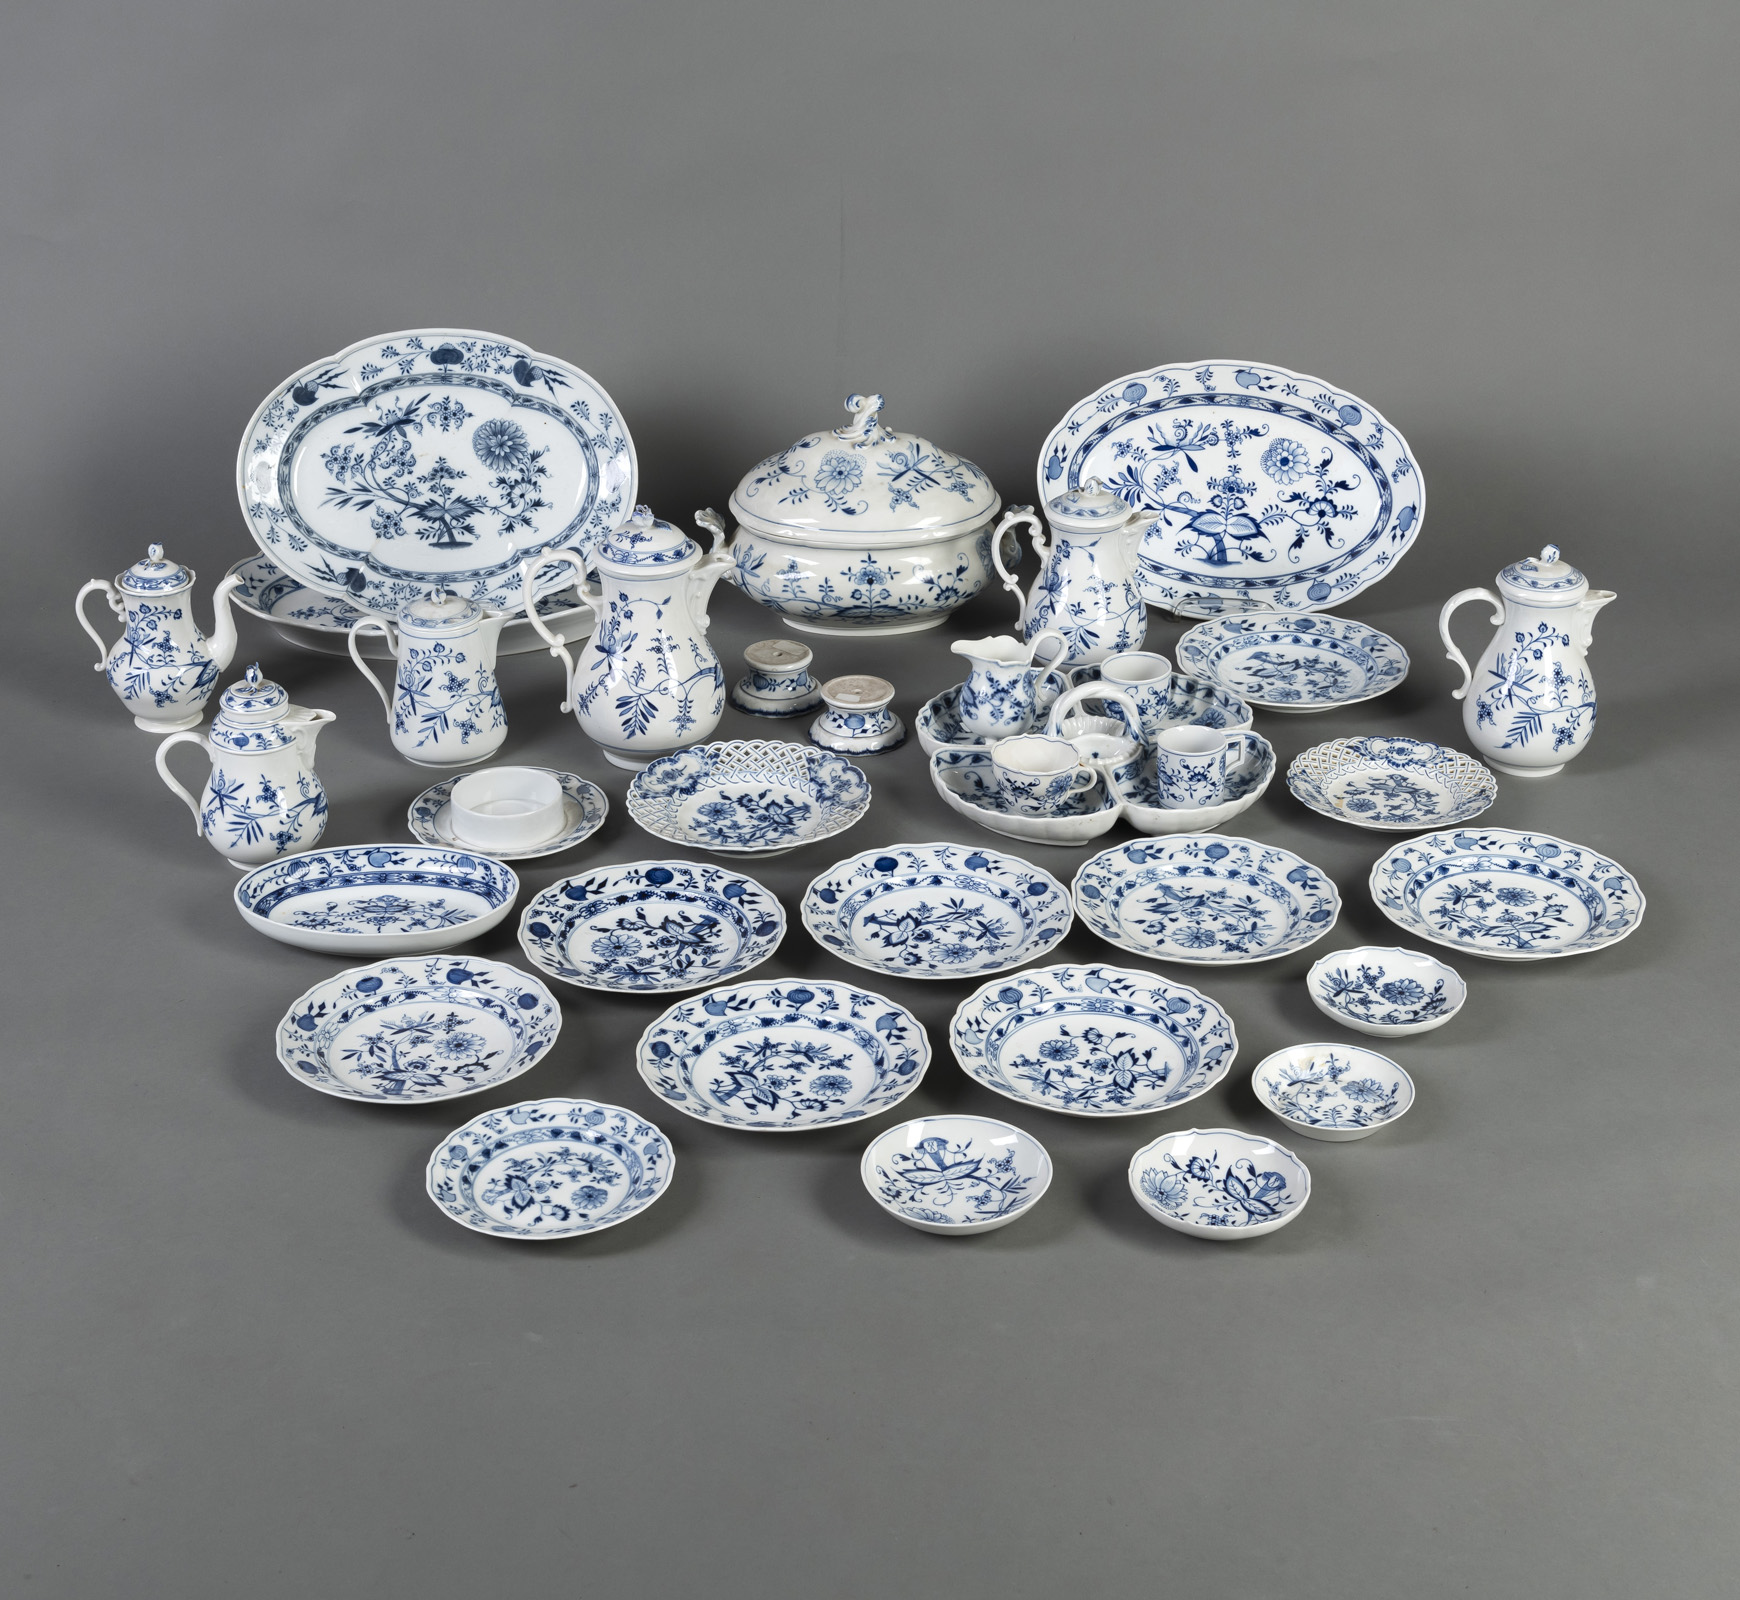 A MIXED LOT OF "ZWIEBELMUSTER" PORCELAIN